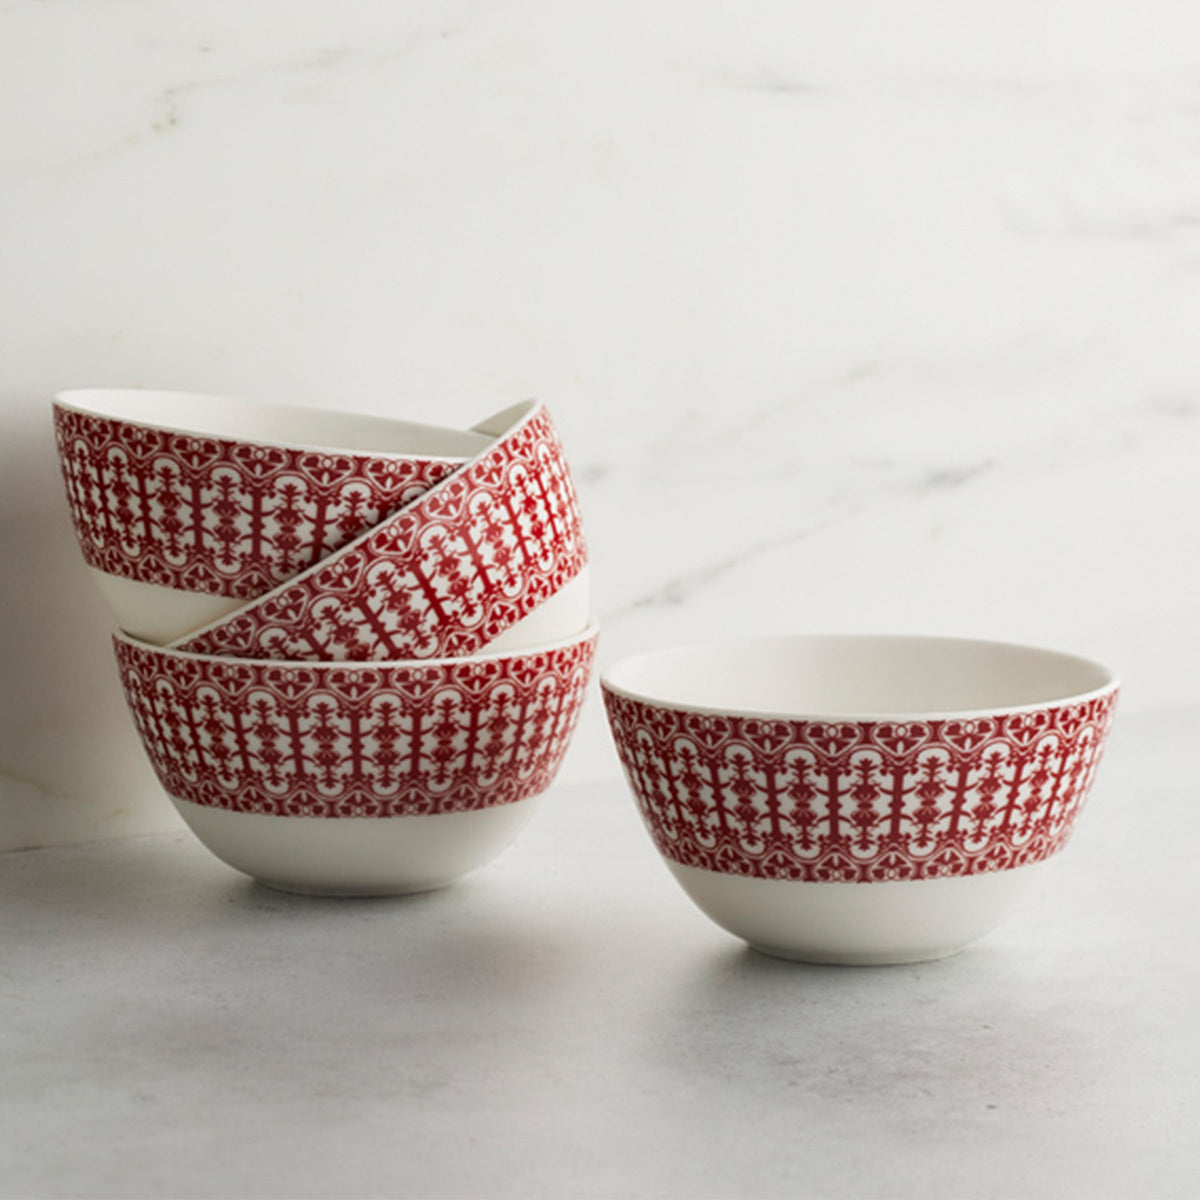 Three Casablanca Crimson Tall Cereal Bowls by Caskata stacked on top of each other.